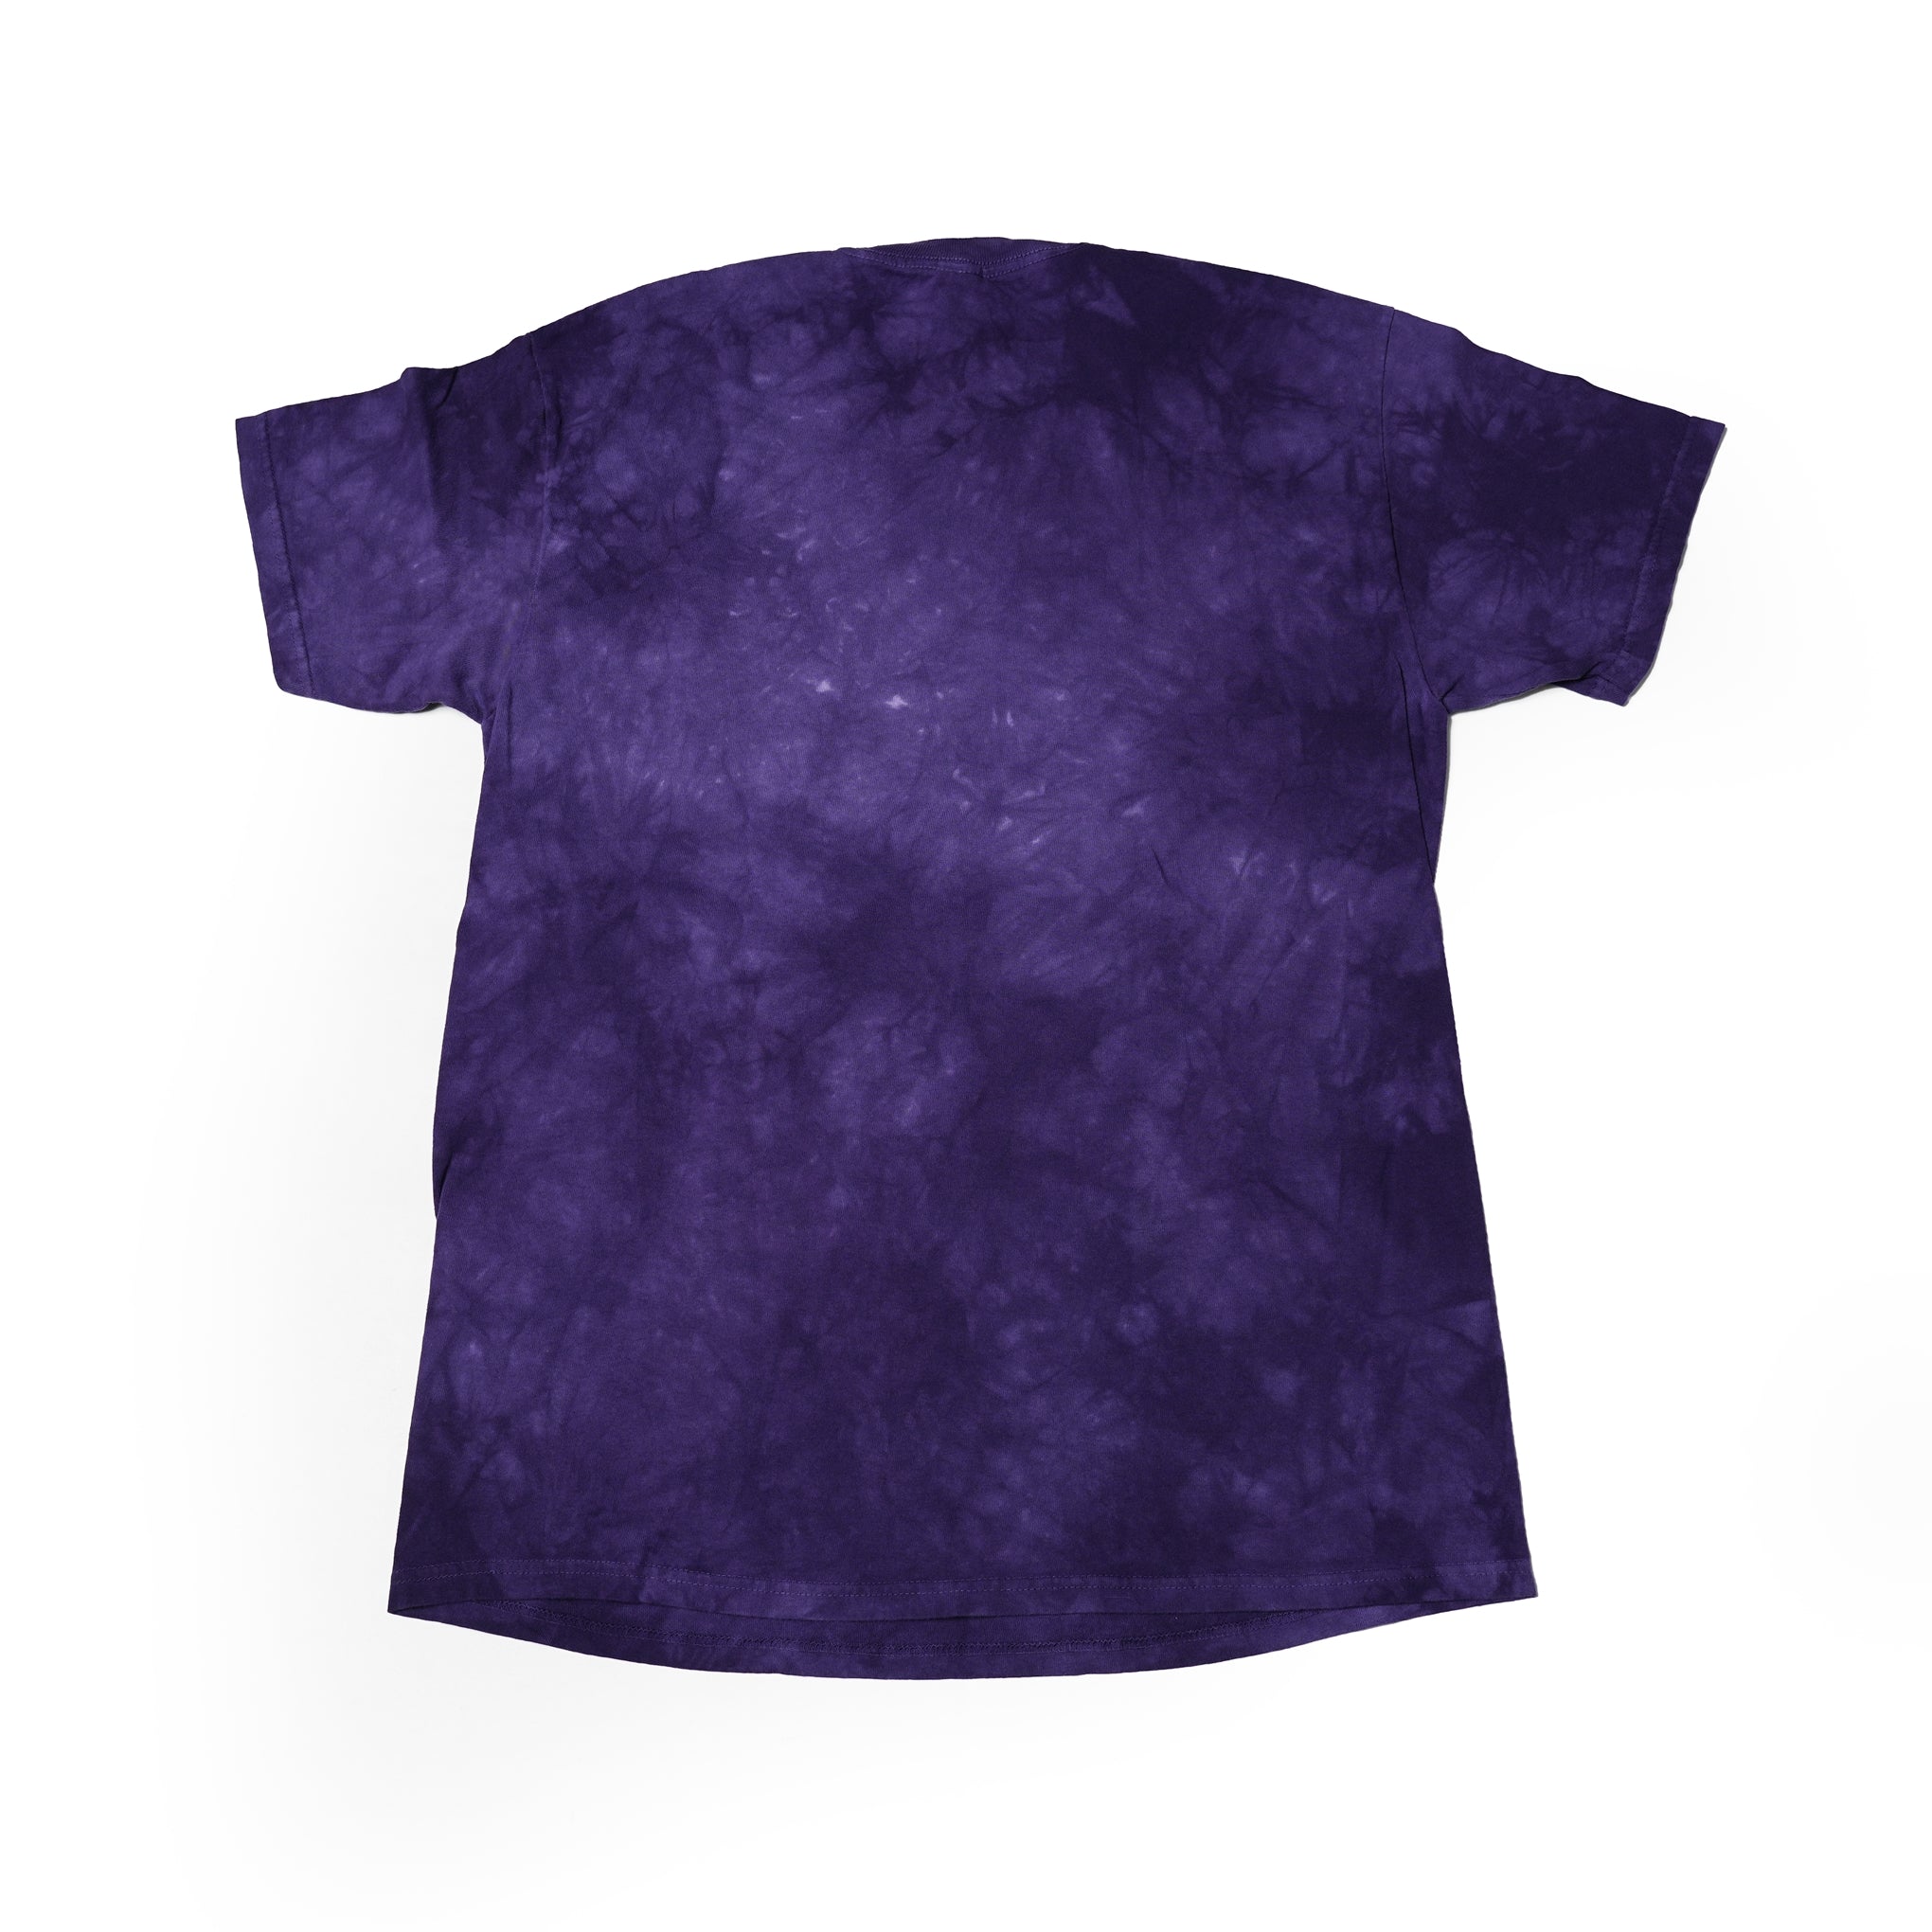 No:1068370314 | Name:Adult Classic Tee | Color:Purple Sweet Poodle【THE MOUNTAIN_ザ マウンテン】【ネコポス選択可能】